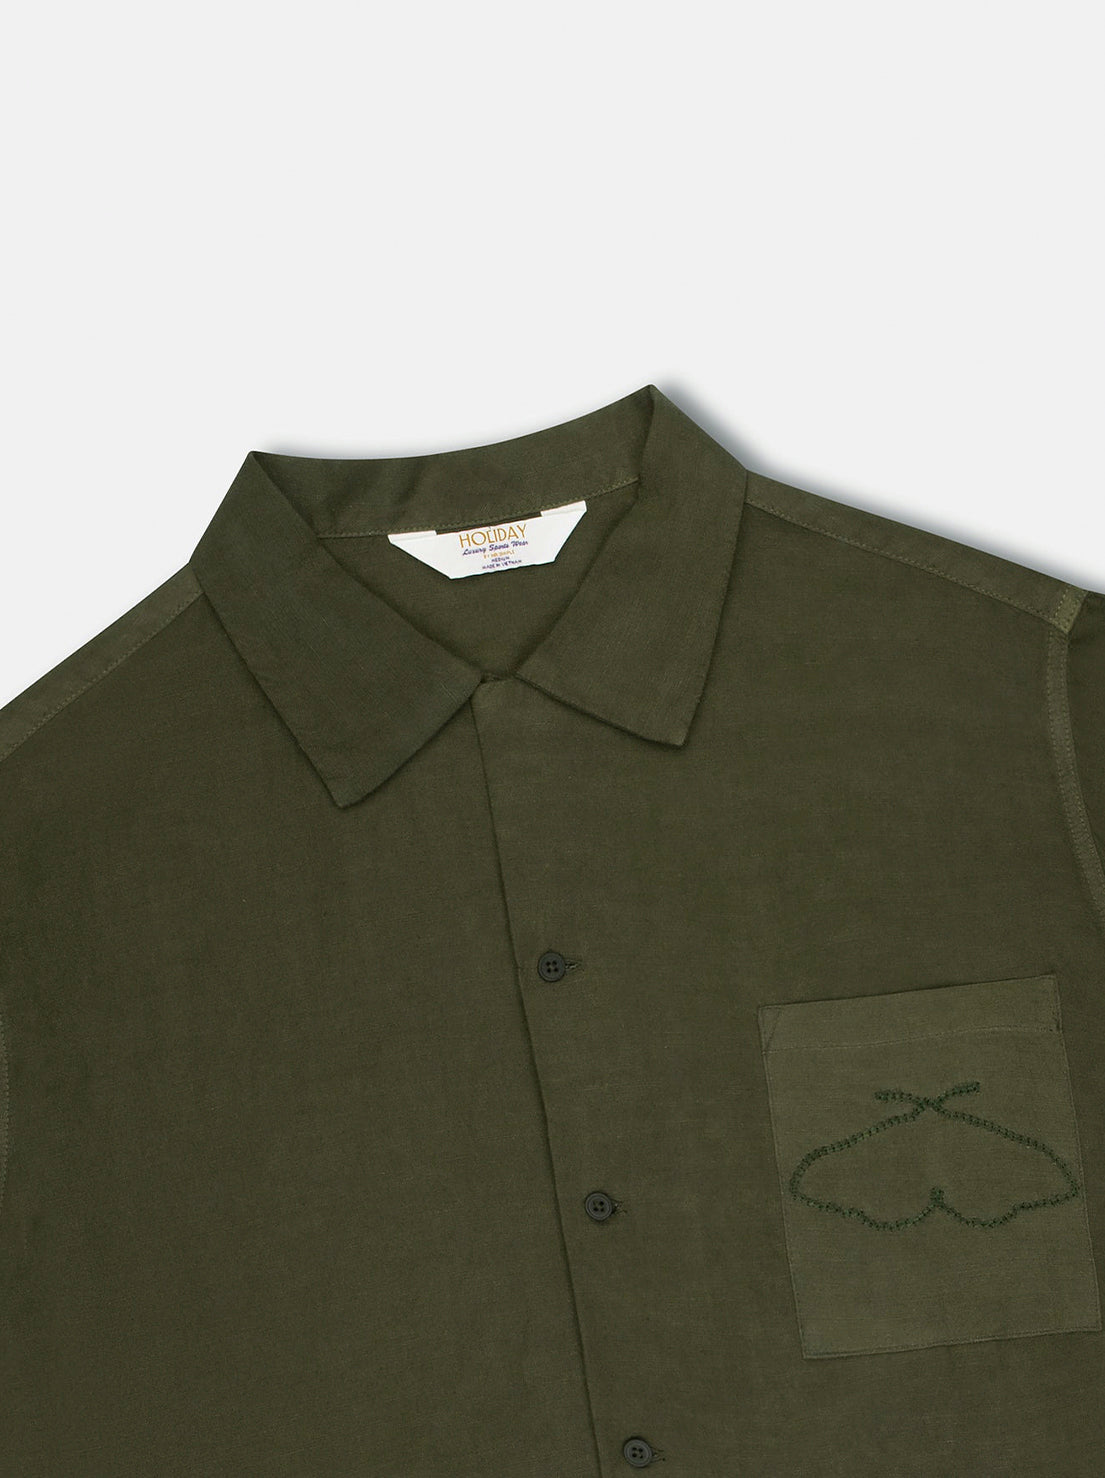 Mr Simple - Huck Embroidered SS Shirt - Fatigue